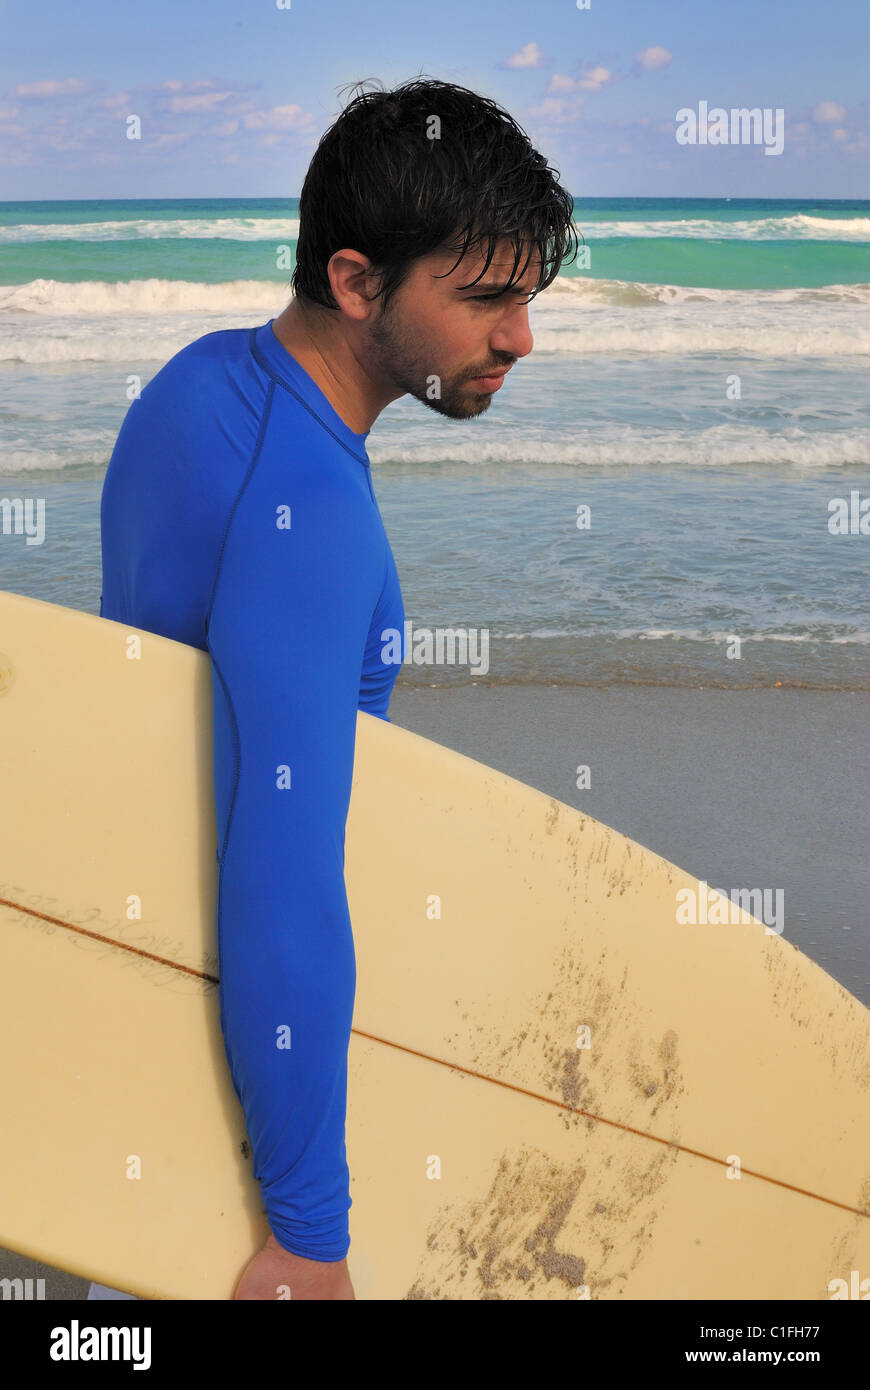 Surfer on the beach with his board. Stock Photo